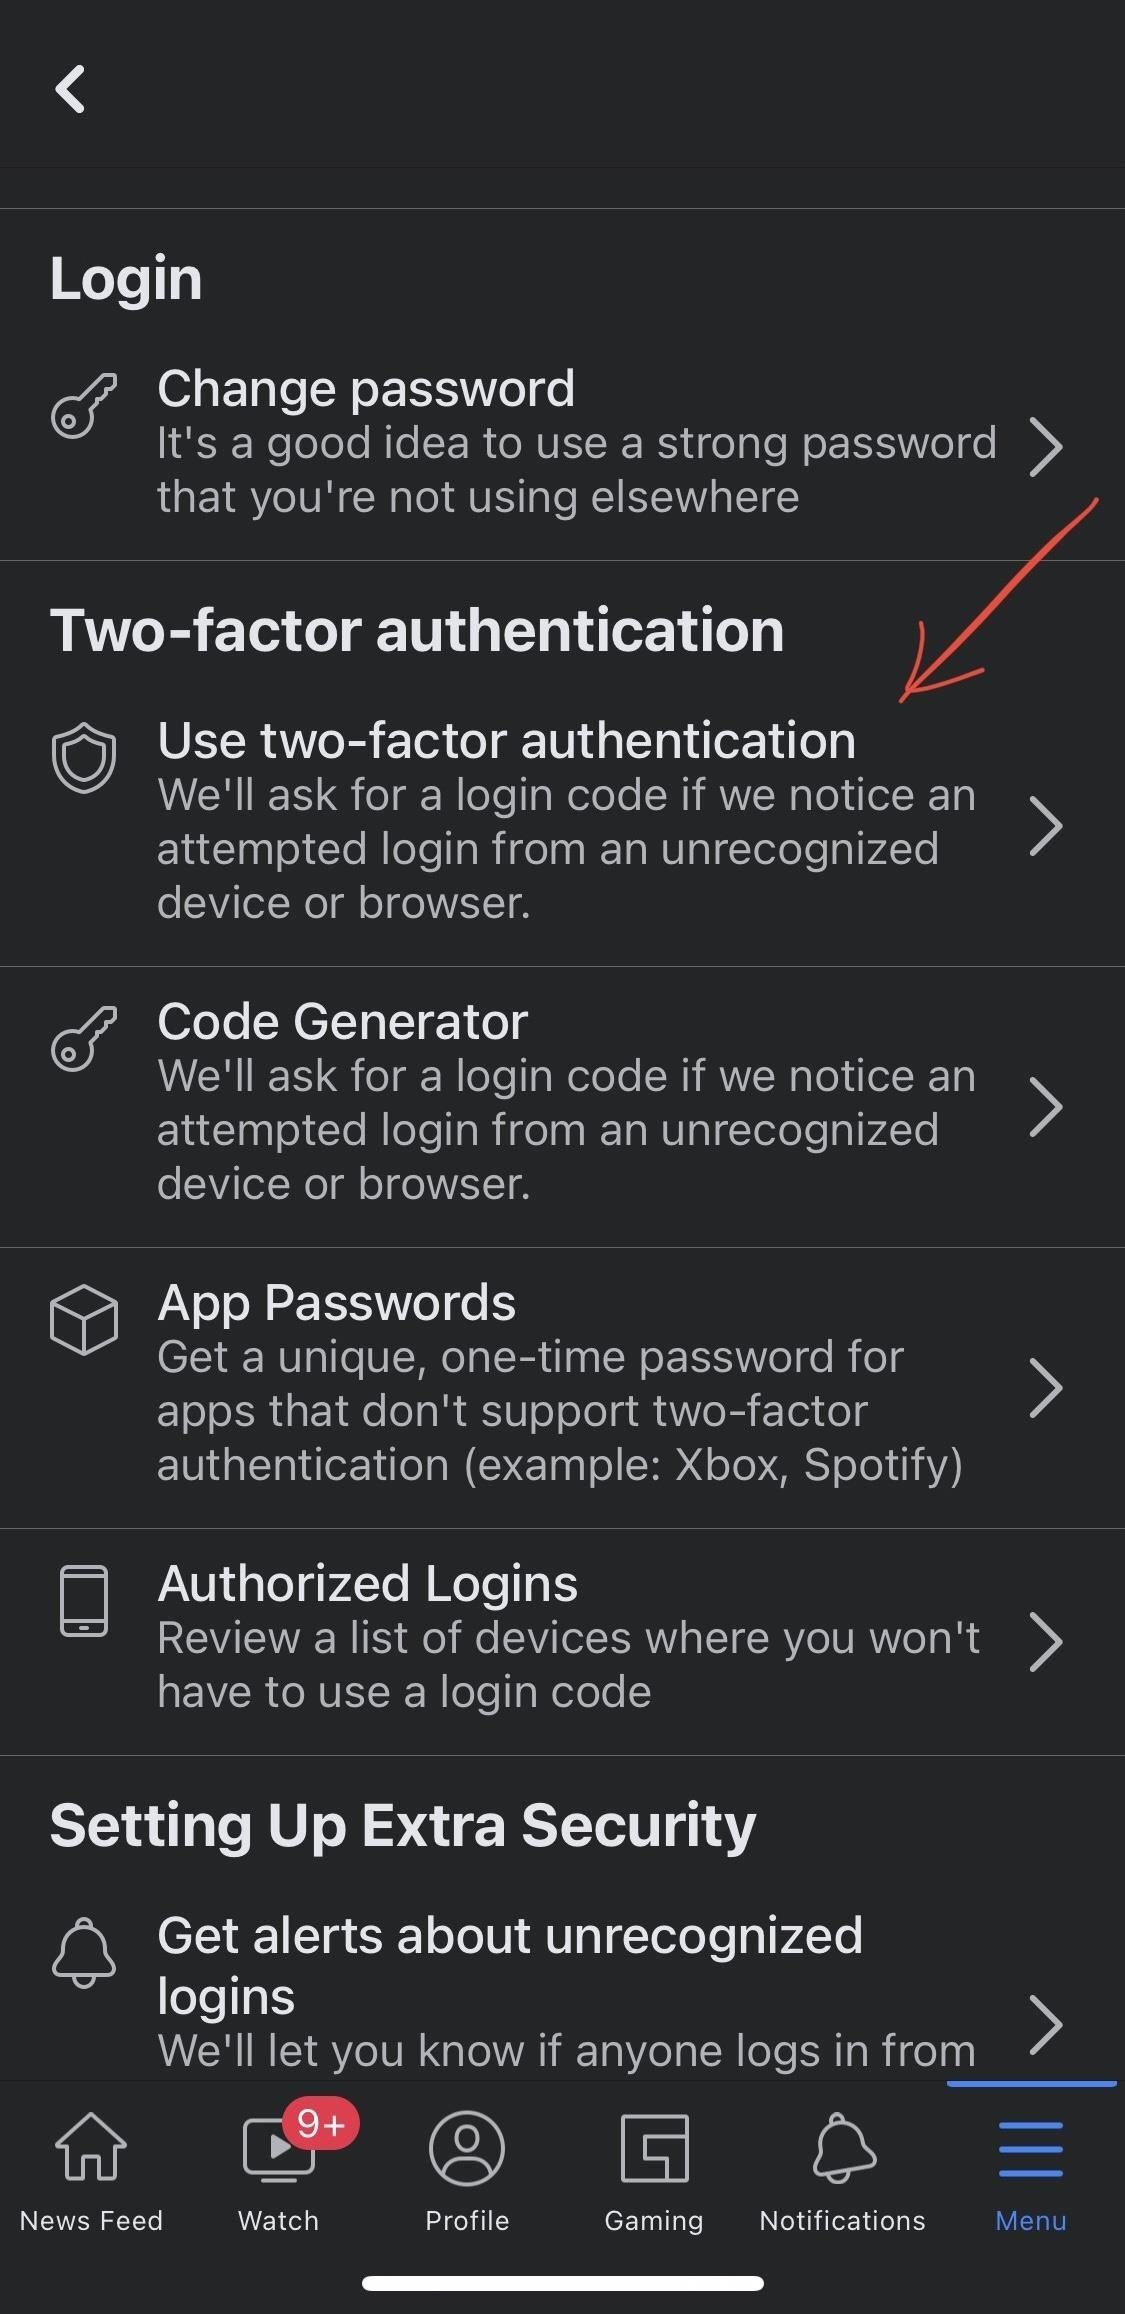 How to Use iOS 15's Built-in Authenticator as a Secure 2FA Method for All Your Accounts